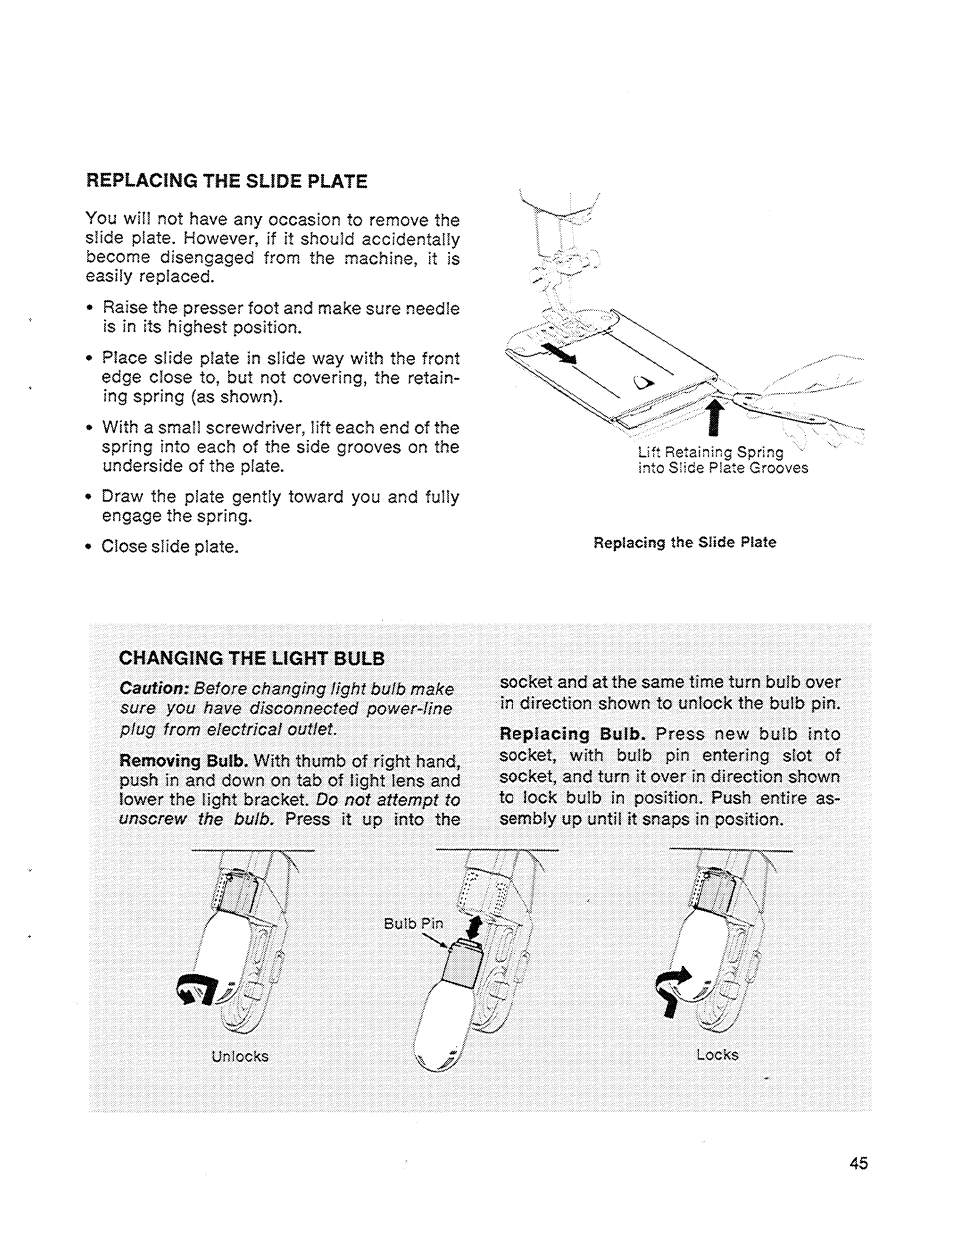 Replacing the slide plate, Changing the light bulb | SINGER 714 Graduate User Manual | Page 47 / 52